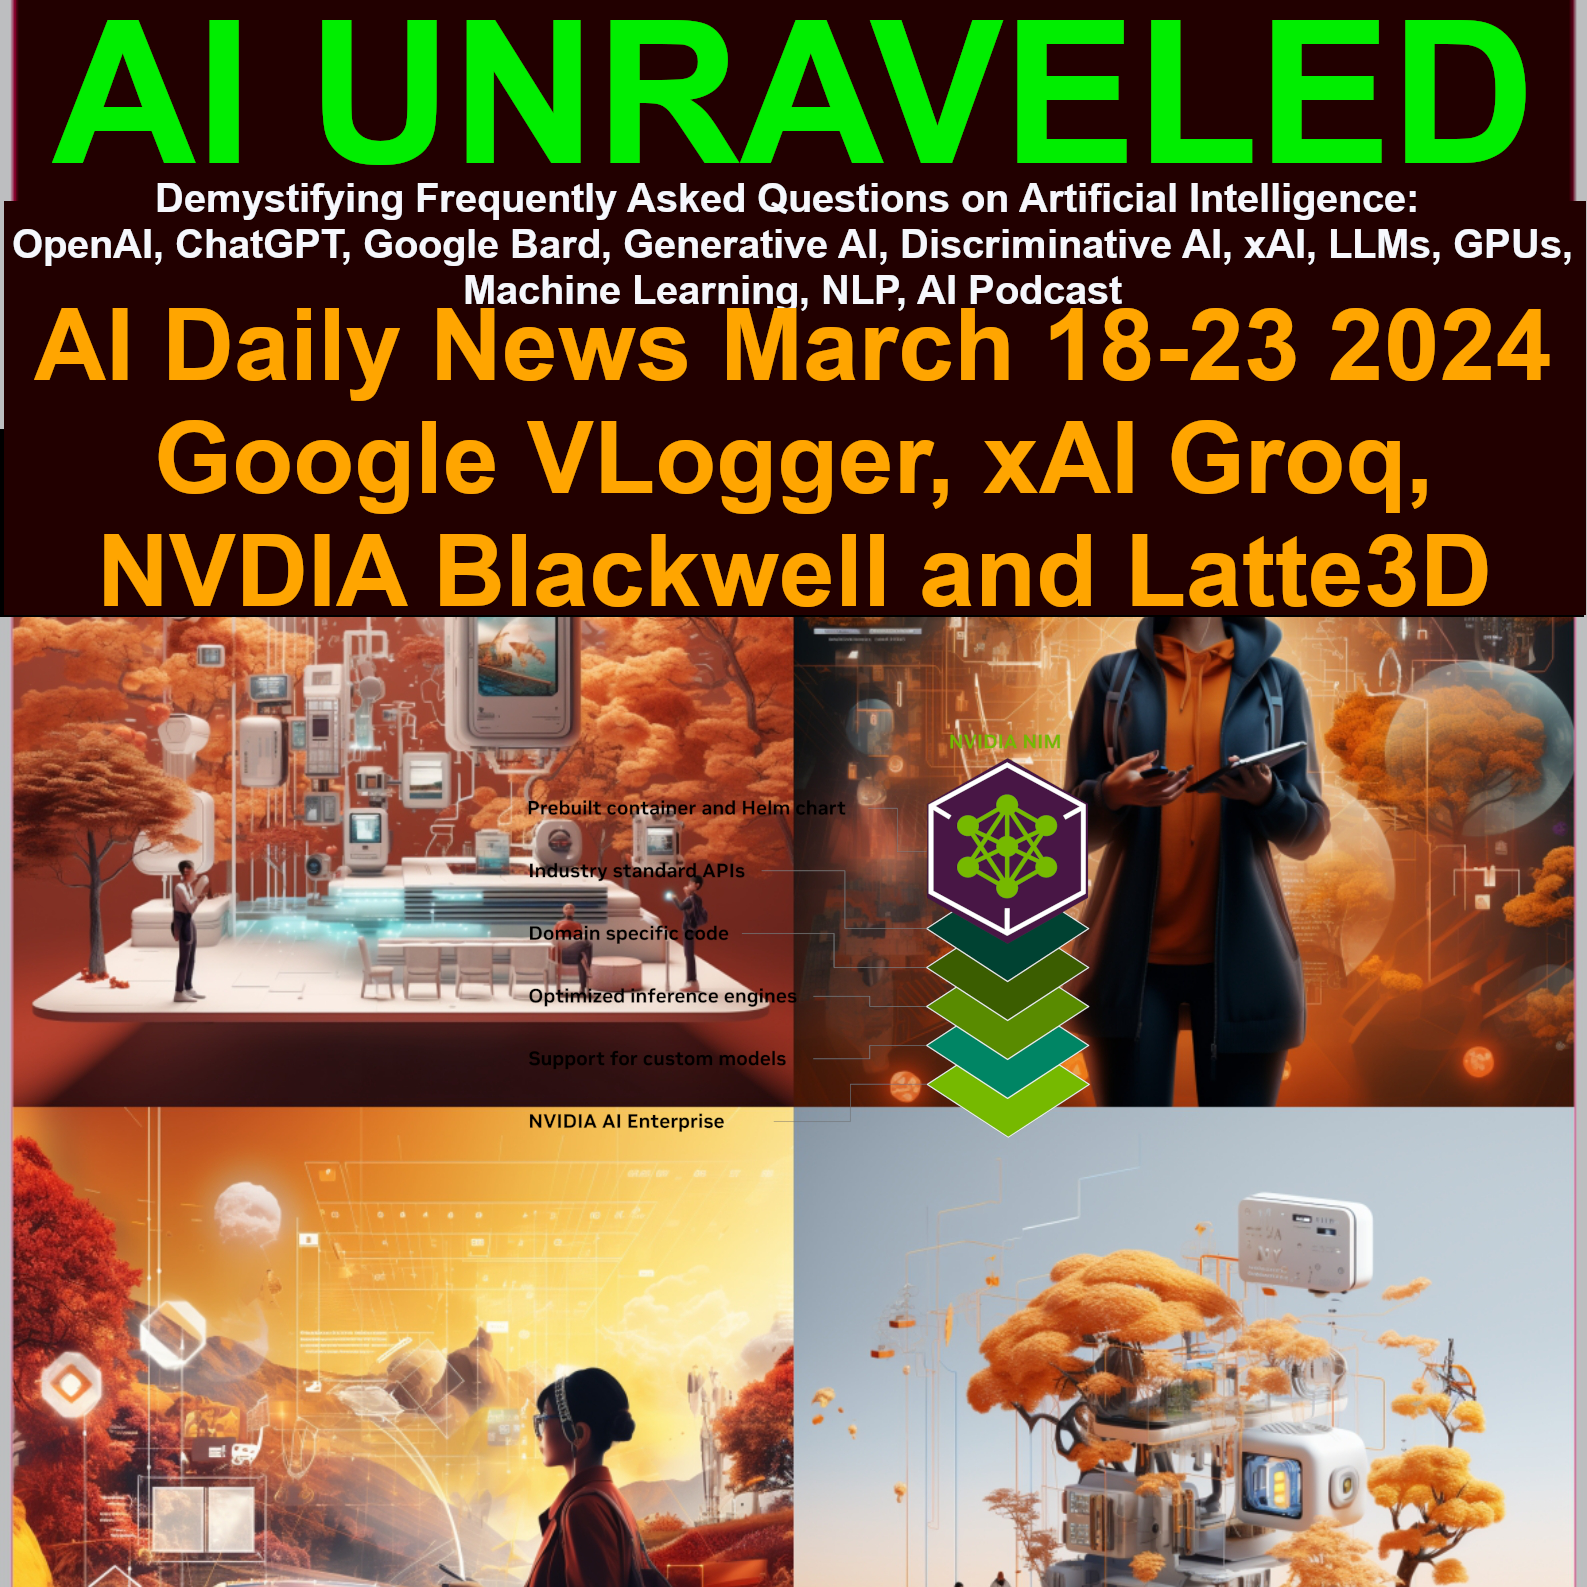 AI Weekly Rundown March 18-23 2024: Major Updates from Google VLogger, xAI Groq, NVDIA Blackwell and Latte3D, MindEye2, OpenAI ChatGPT 5, and more